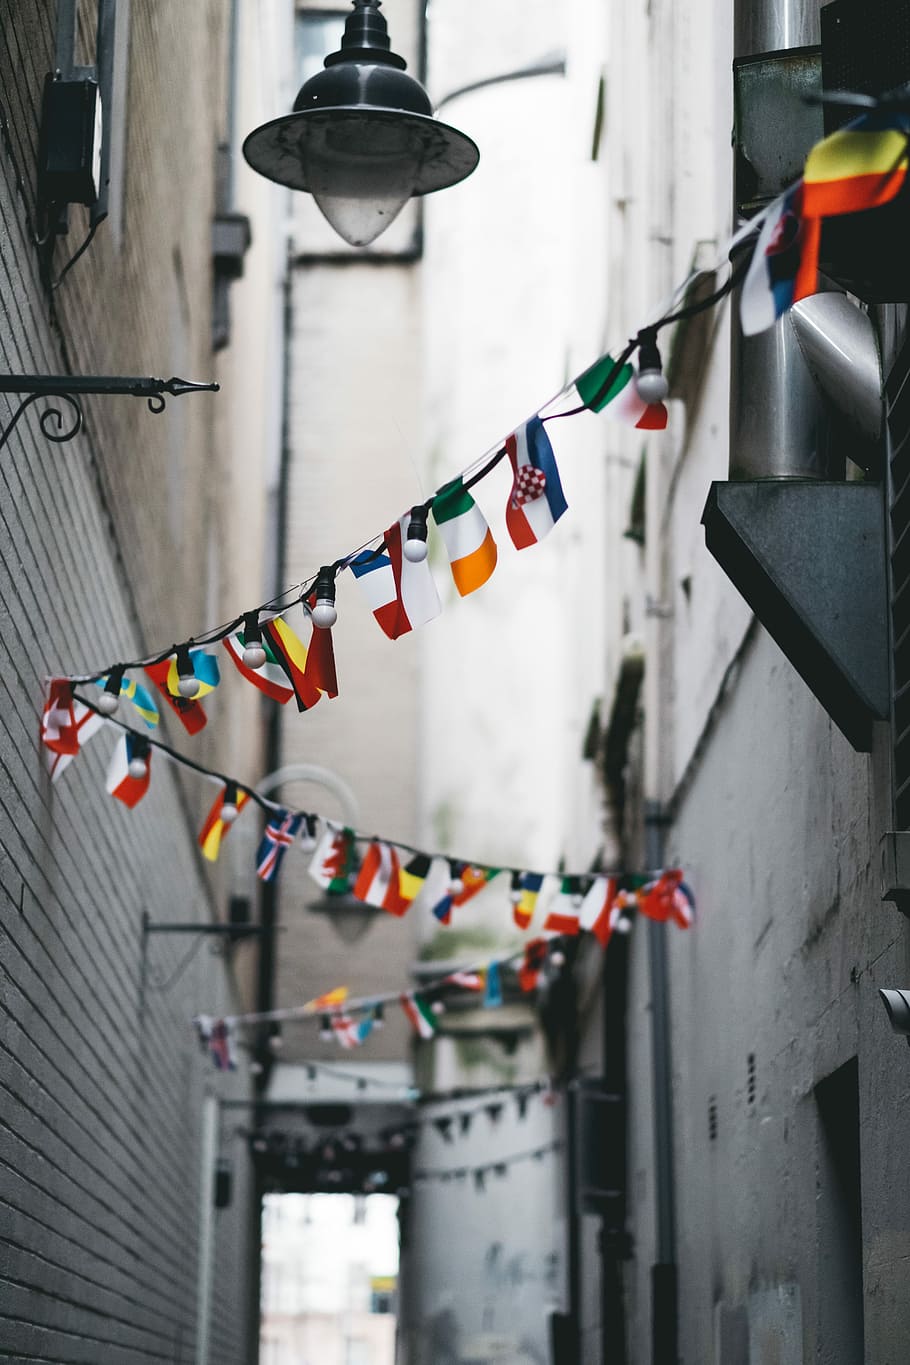 multicolored buntings on pathway, assorted flag pennants, street light